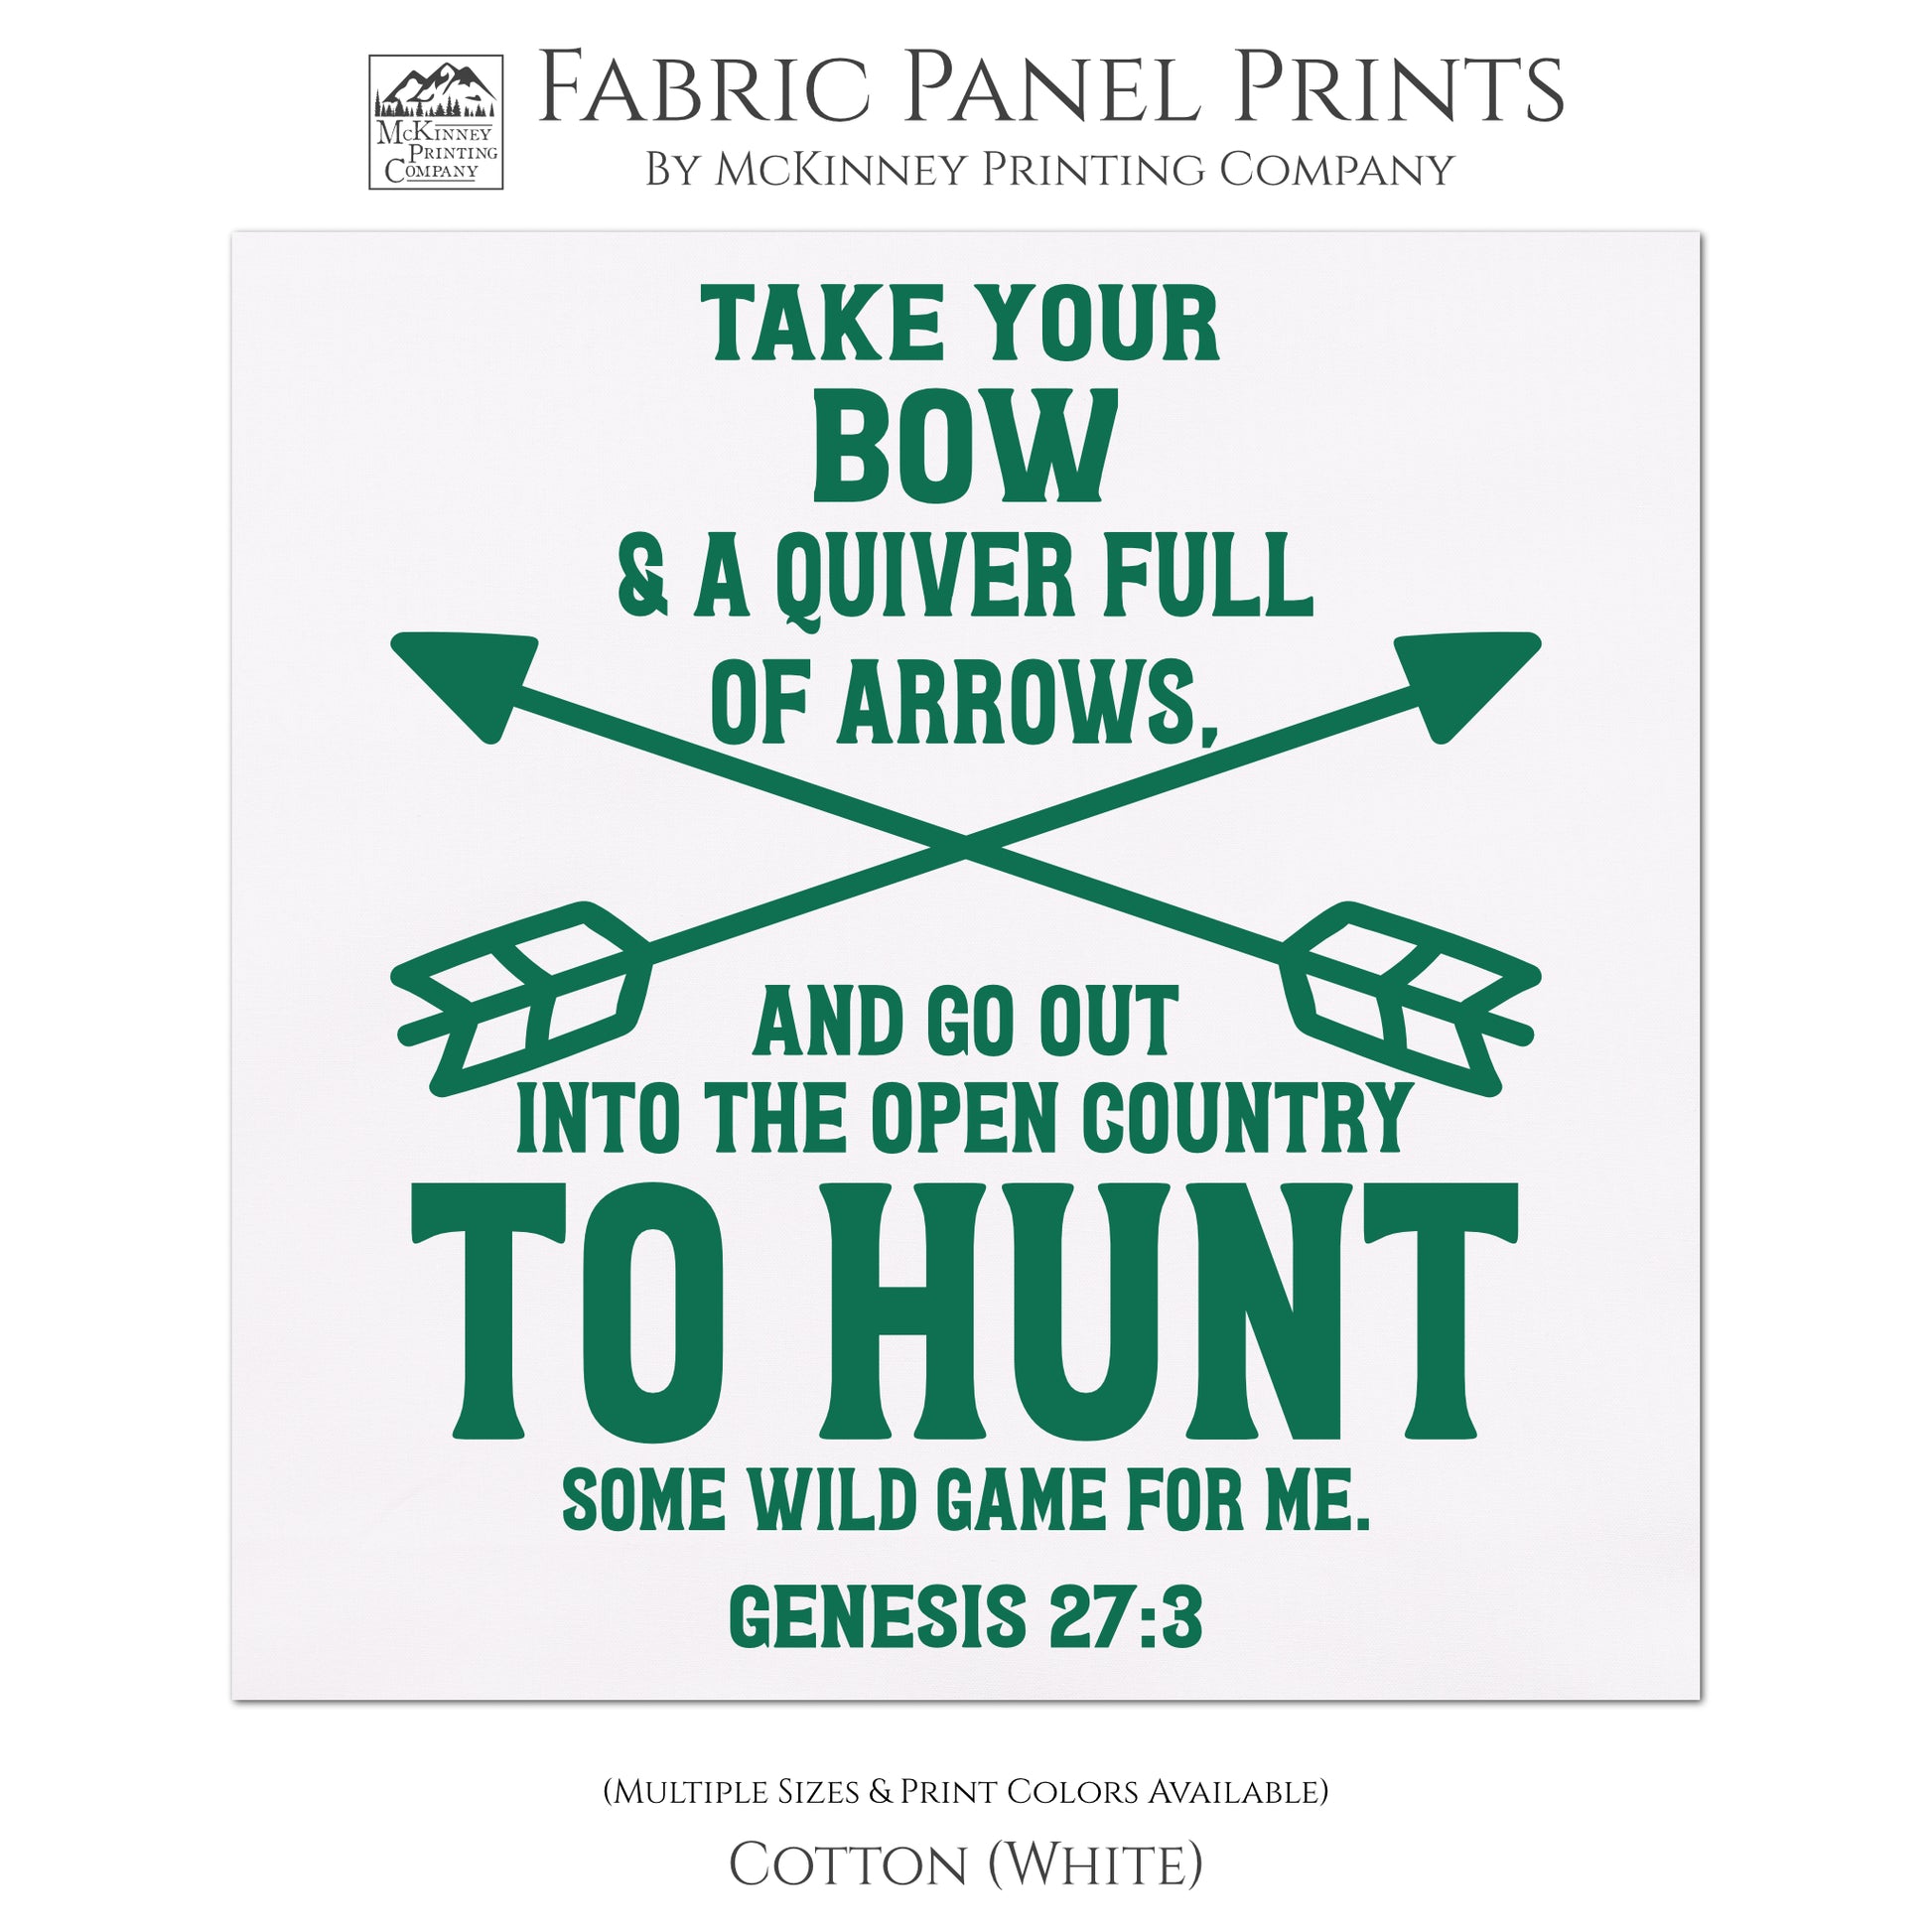 Take you box and a quiver full of arrows and go out into the open country to hunt some wild game for me. - Genesis 27:3 - Religious Fabric, Scripture Fabric, Hunting Fabric, Wall Art, Quilting, Quilt, Crafting, Quilt Block, Print - Cotton, White